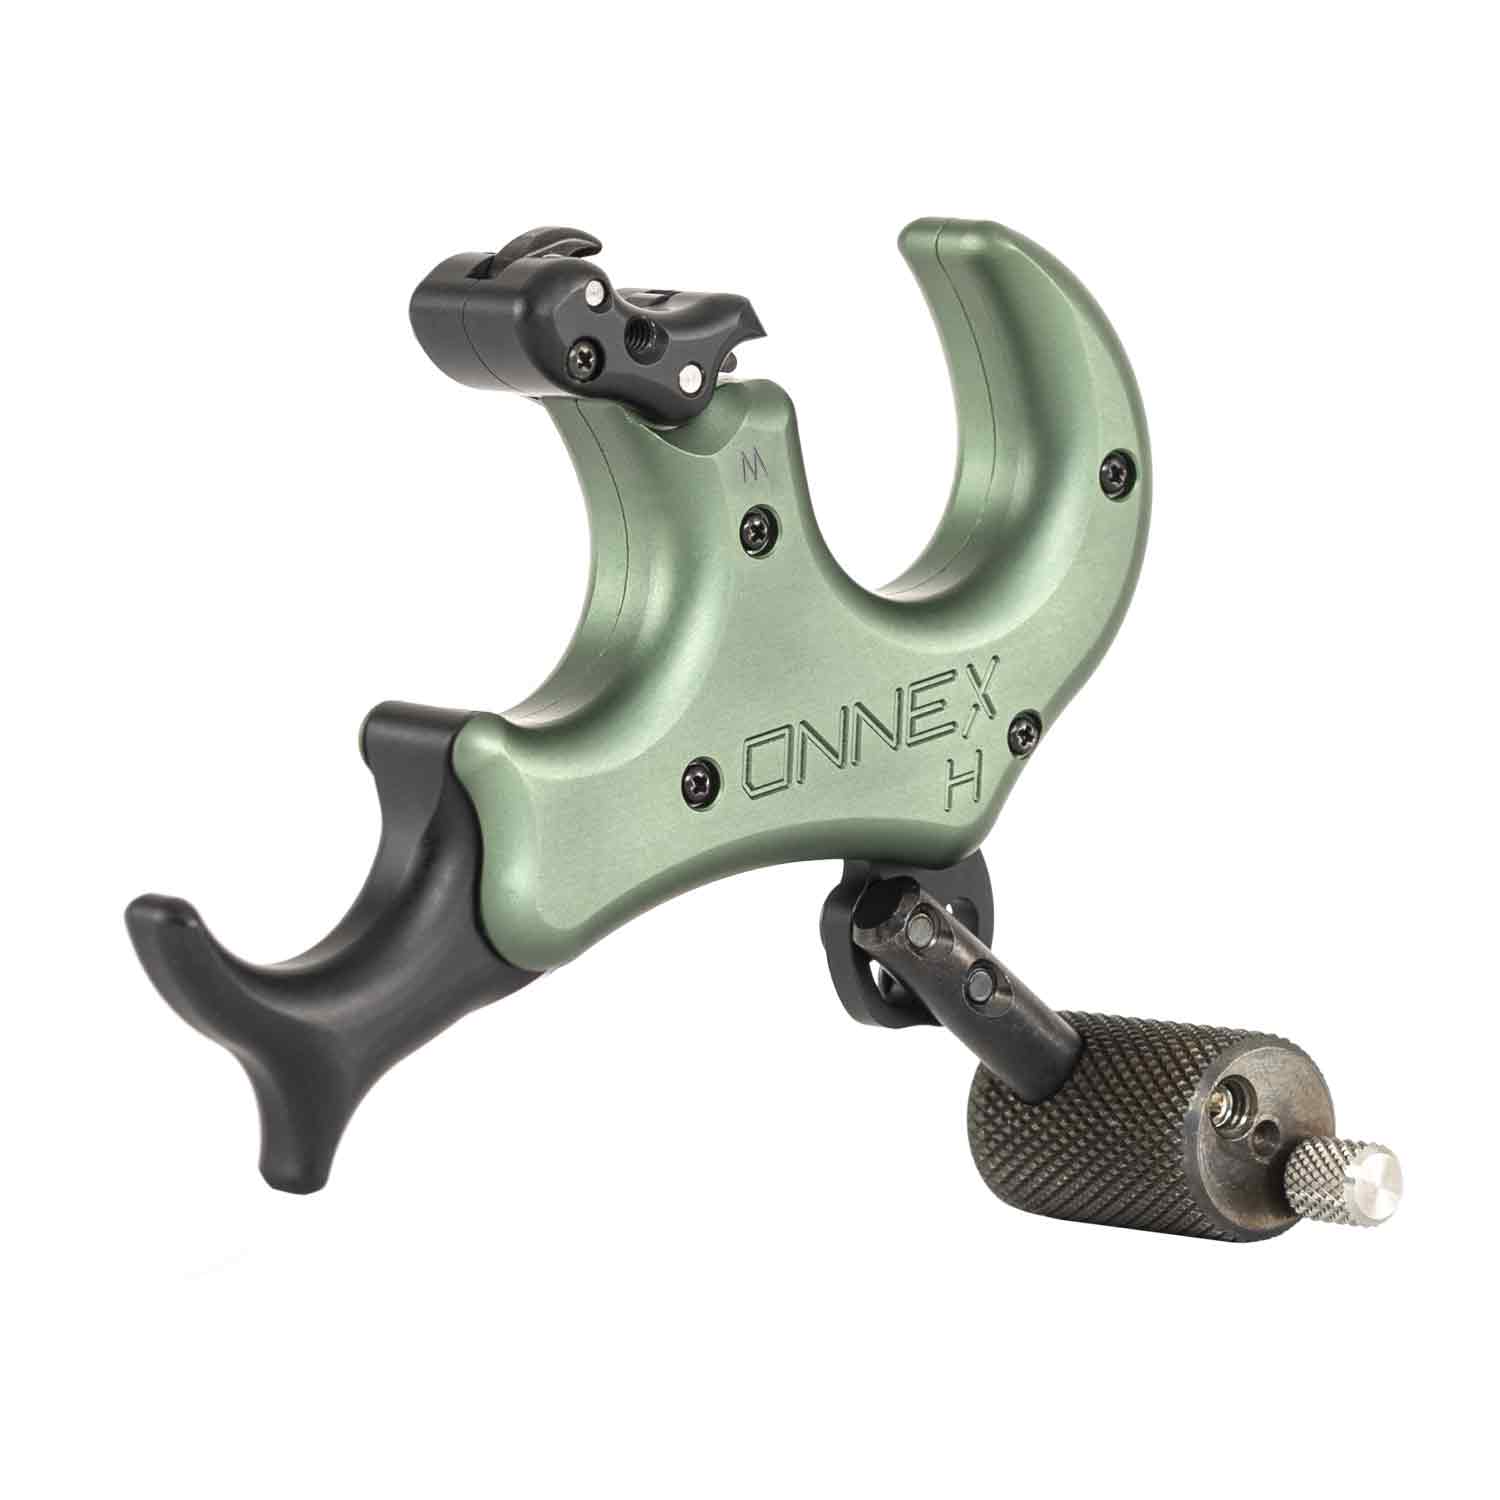 Stan OnneX Back Tension Release